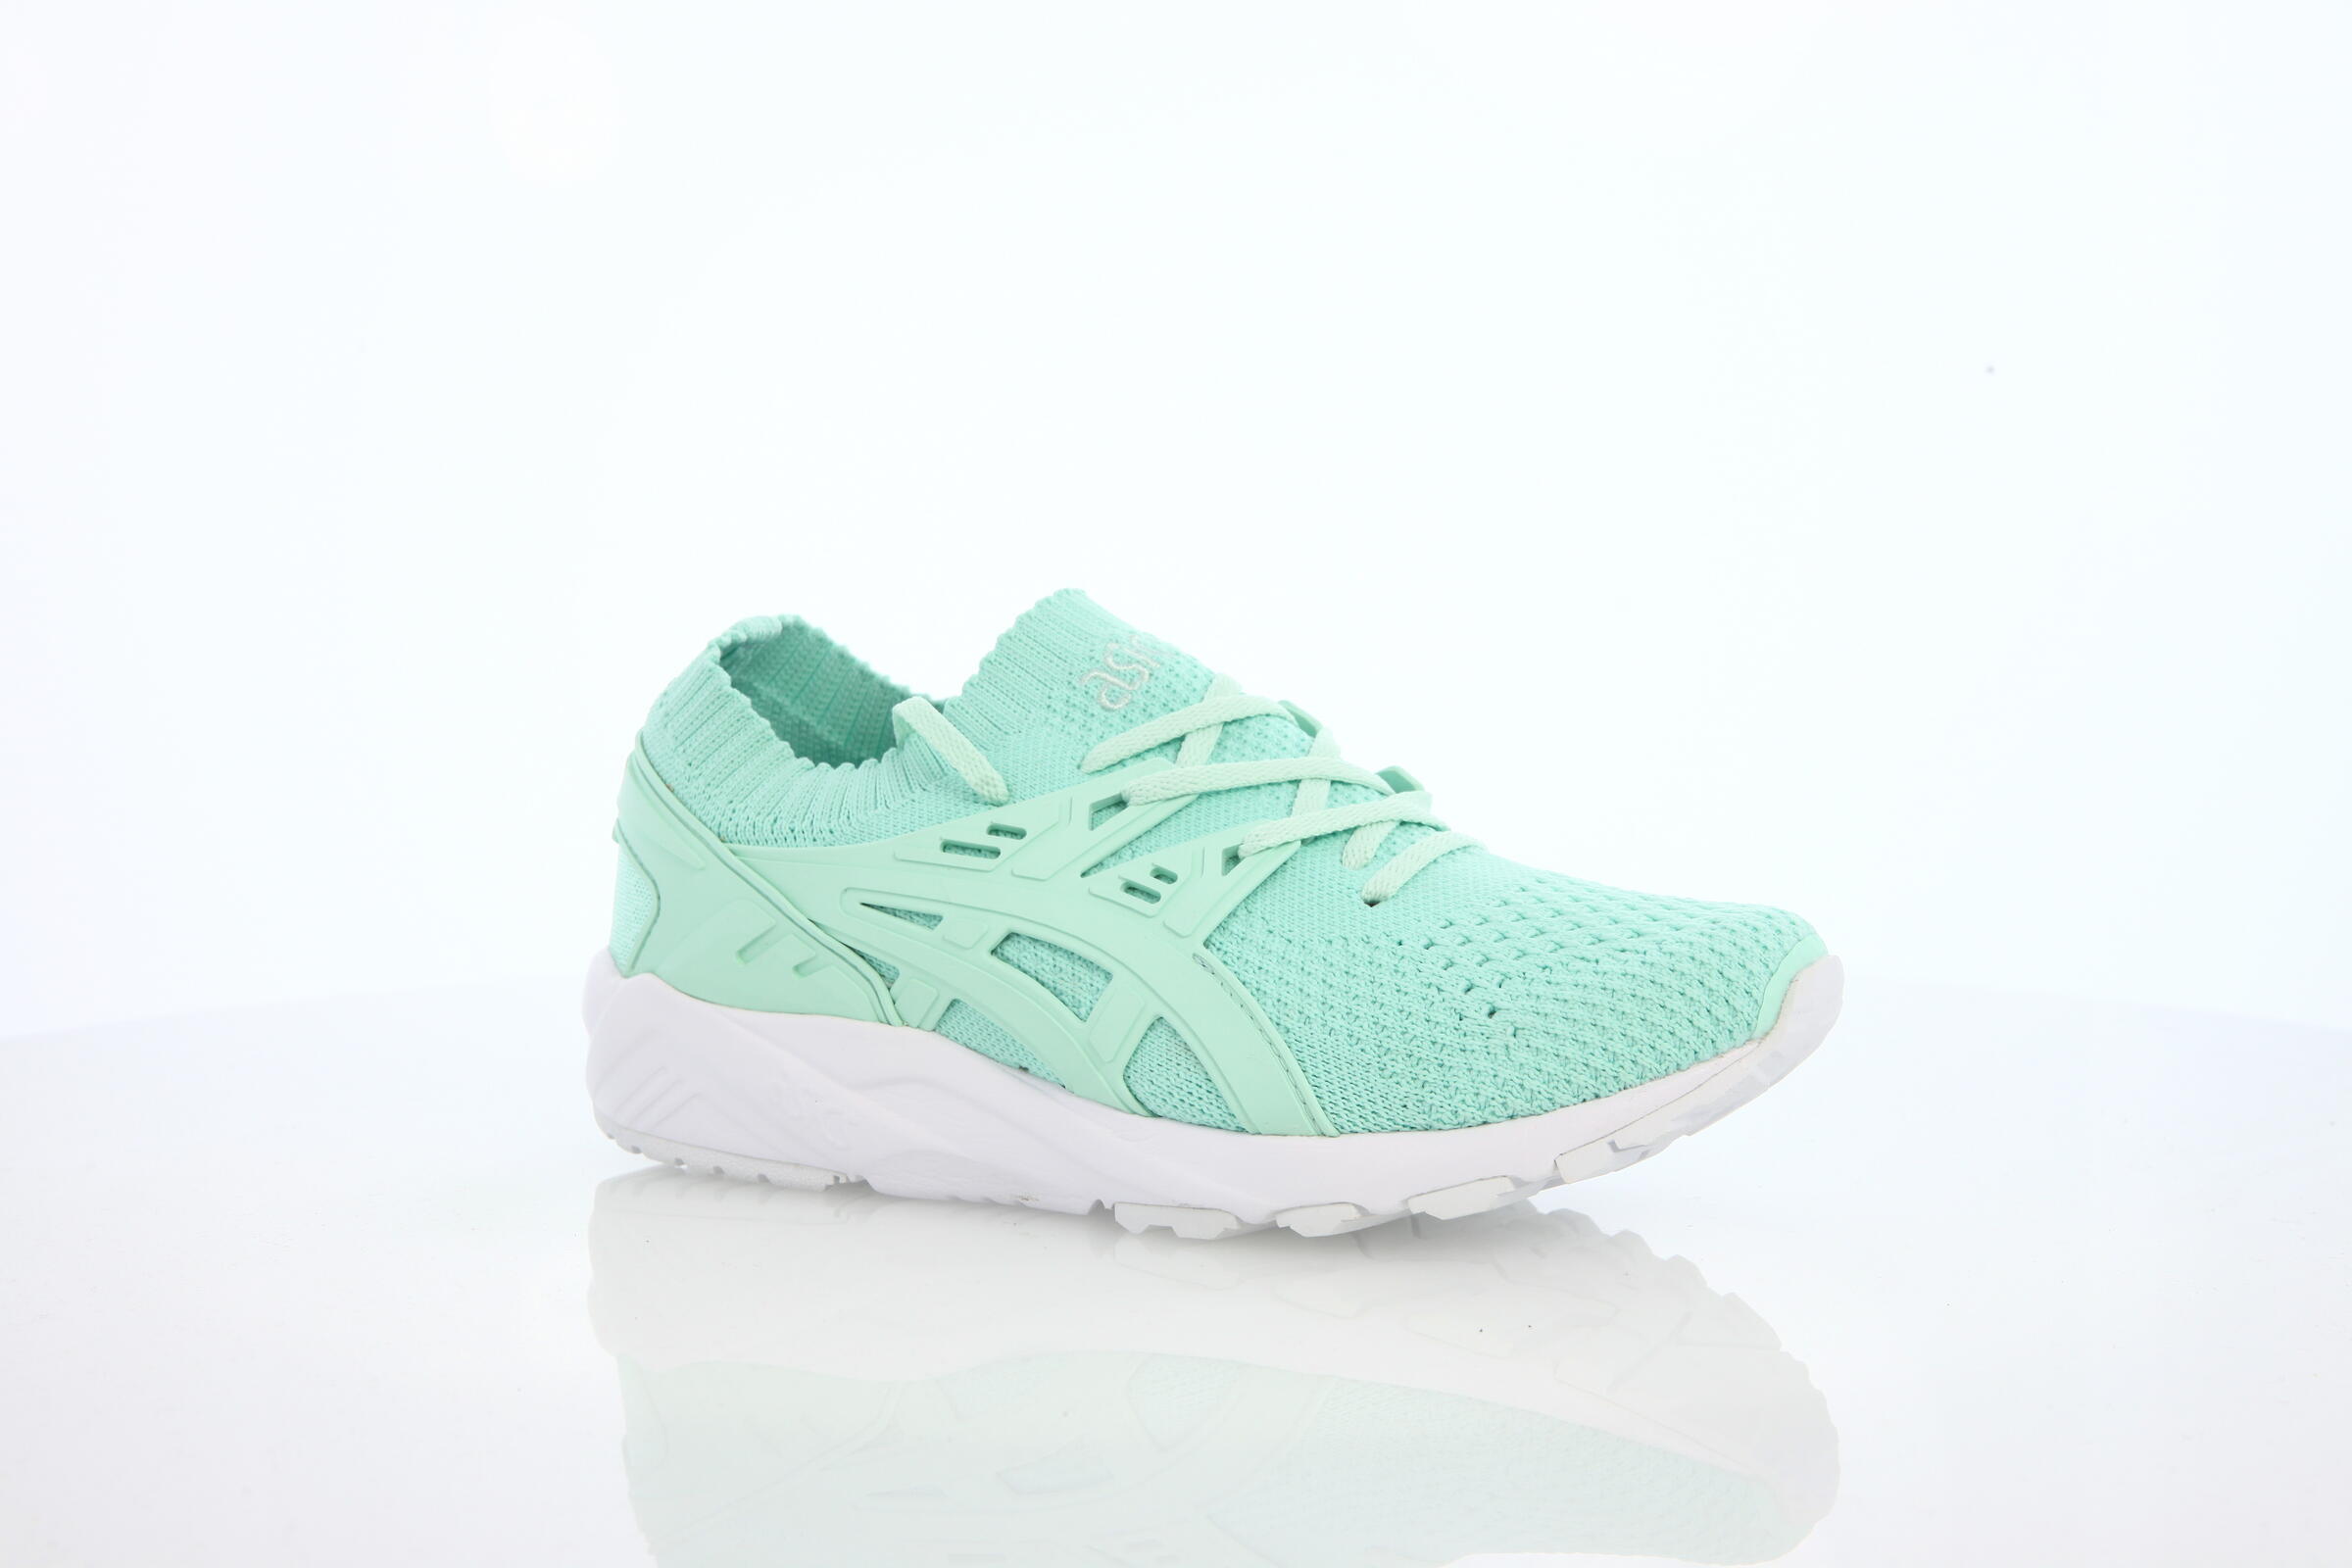 Asics Gel-Kayano Trainer One Piece Knit Pack "Bay"